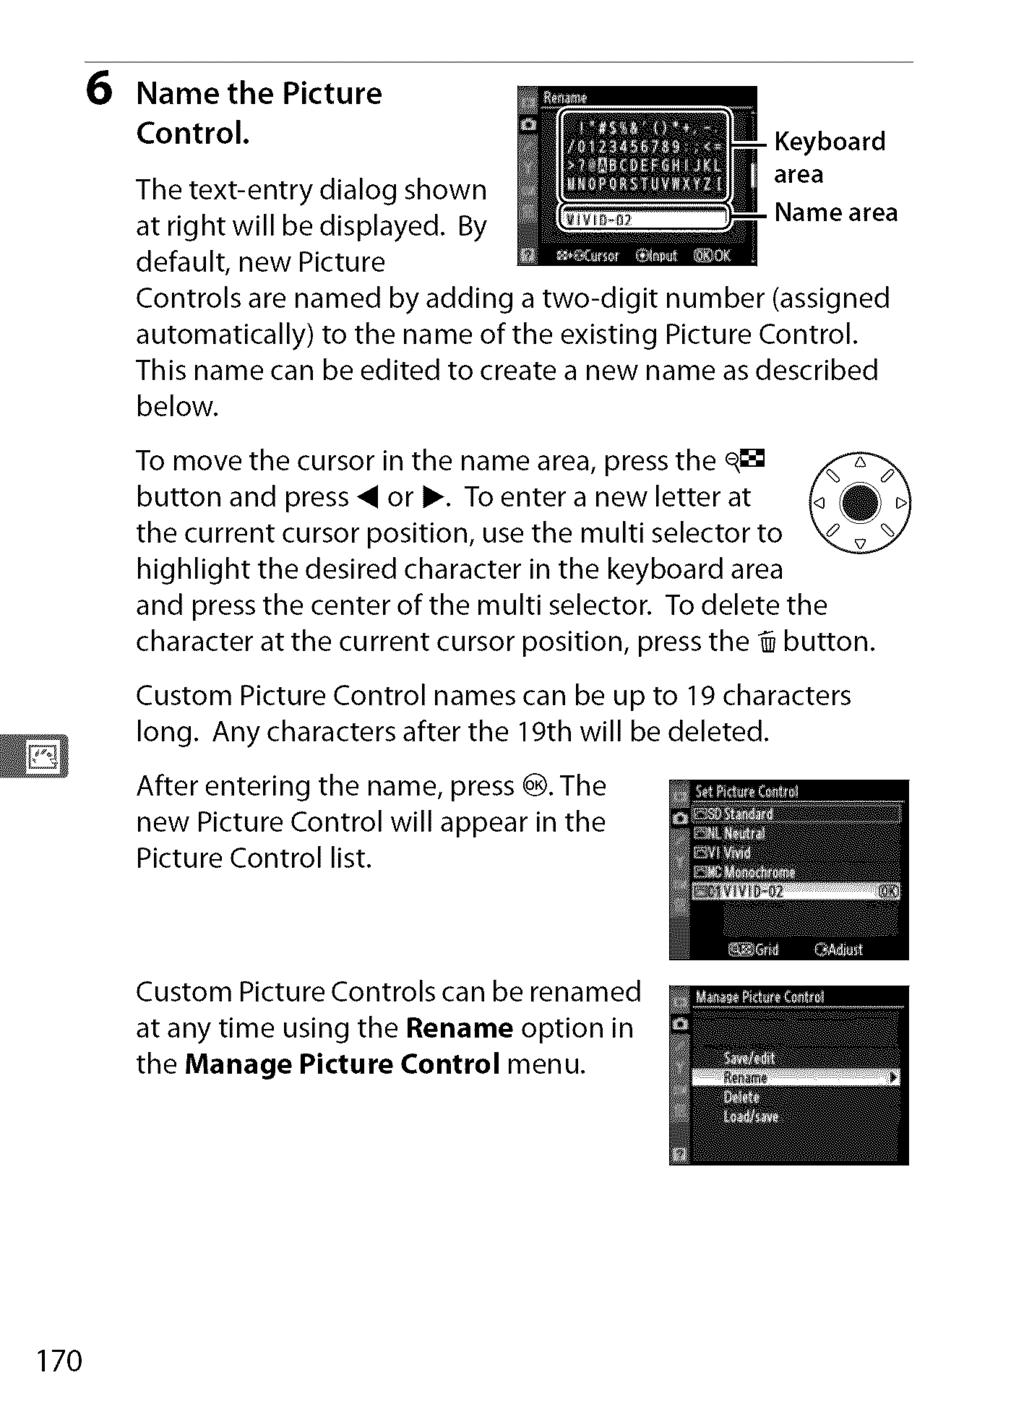 6 Name the Picture Control. The text-entry dialog shown at right will be displayed.